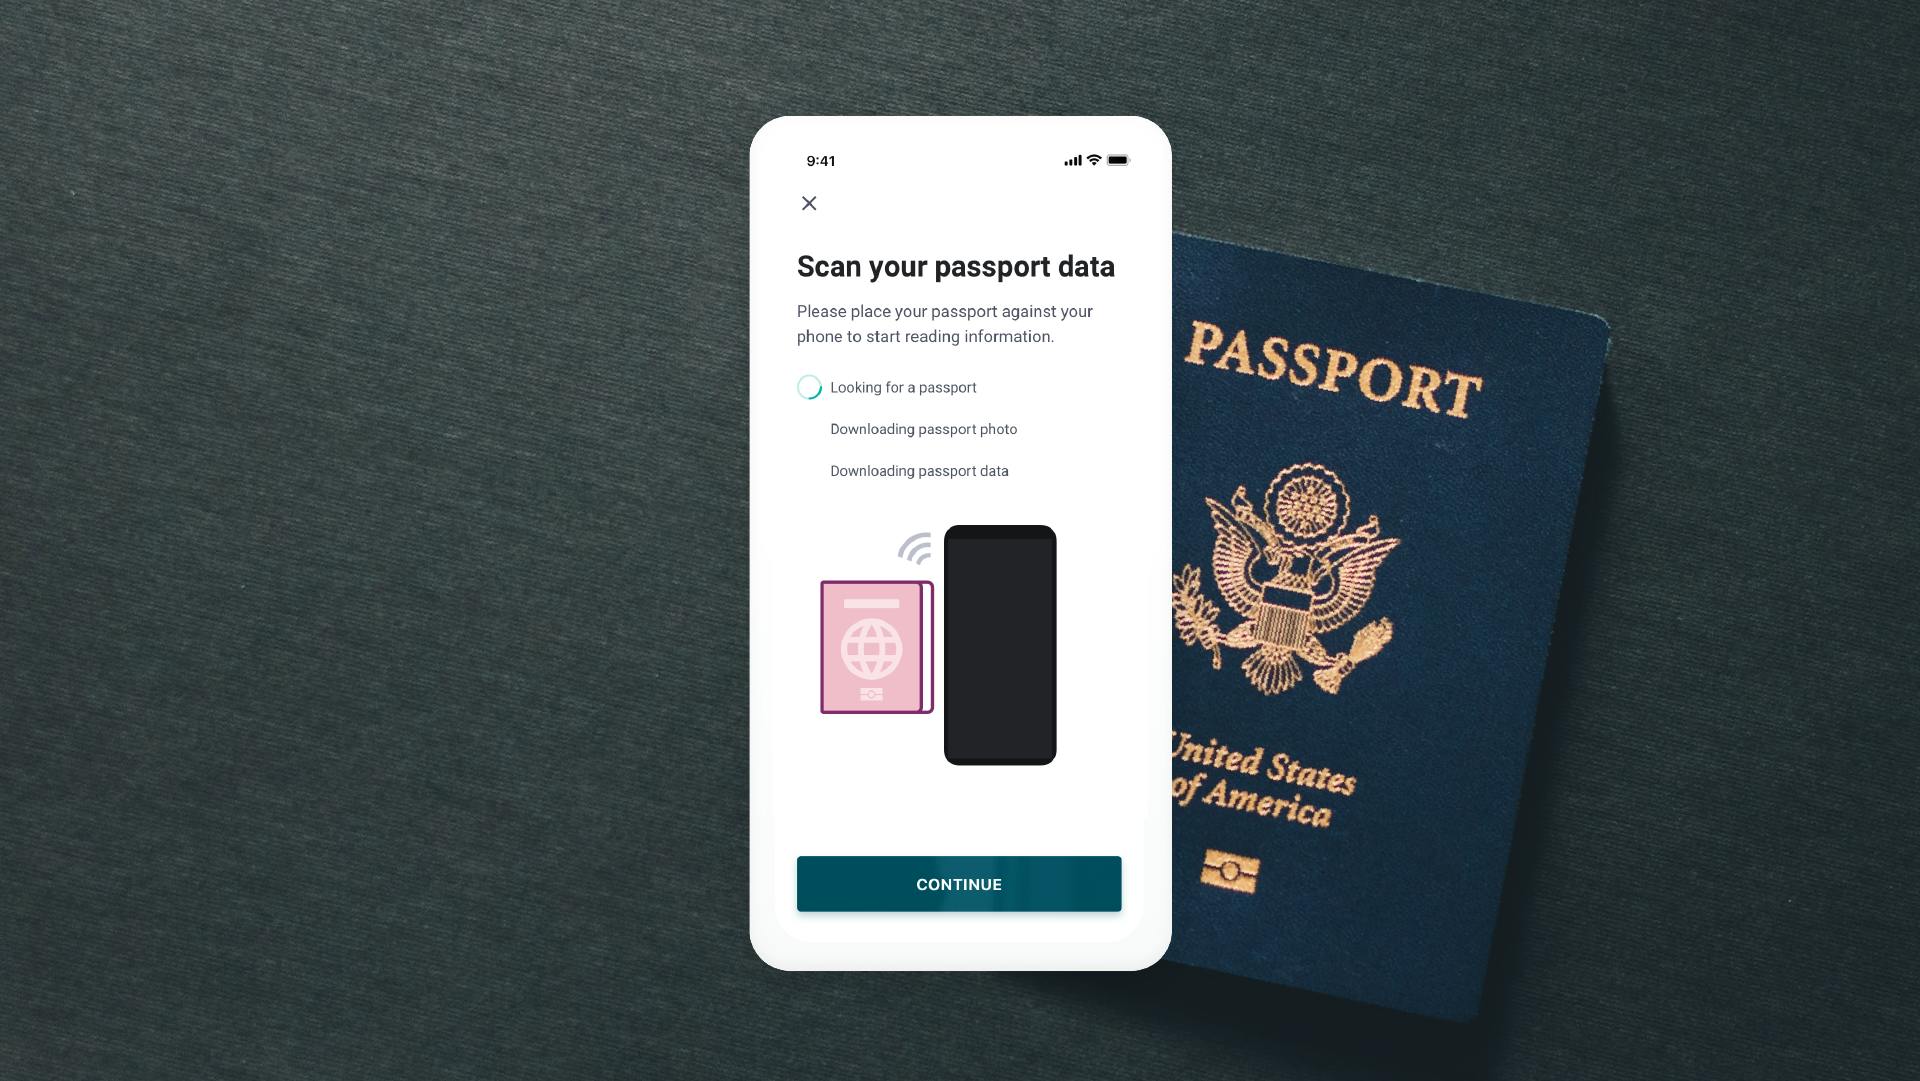 Example of how to scan a passport within Veriff.